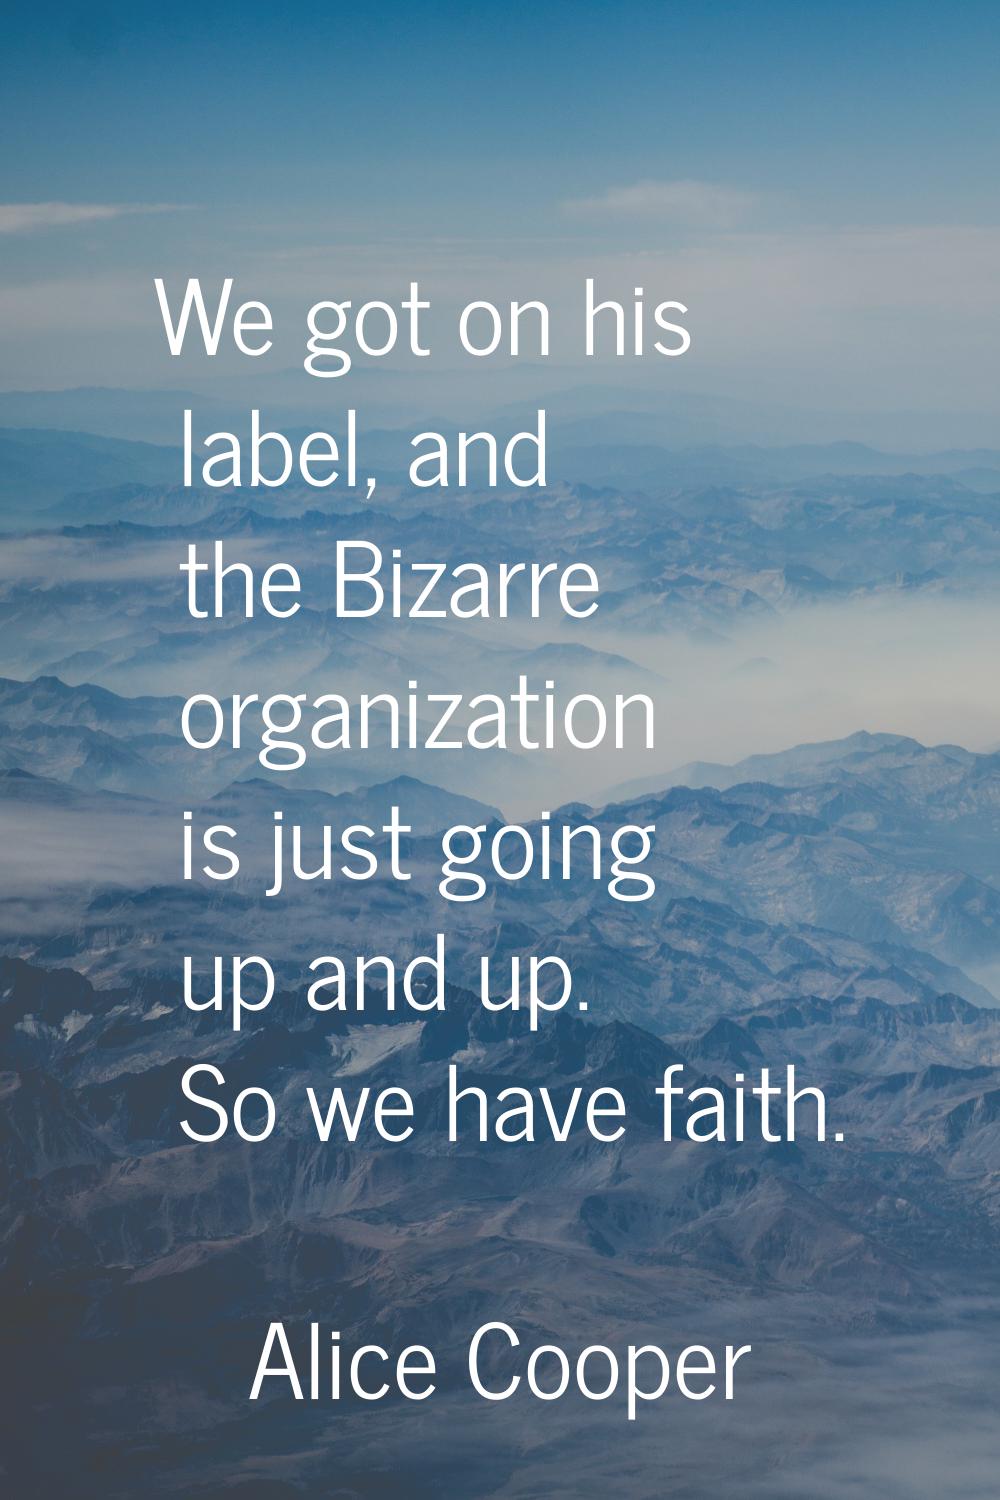 We got on his label, and the Bizarre organization is just going up and up. So we have faith.